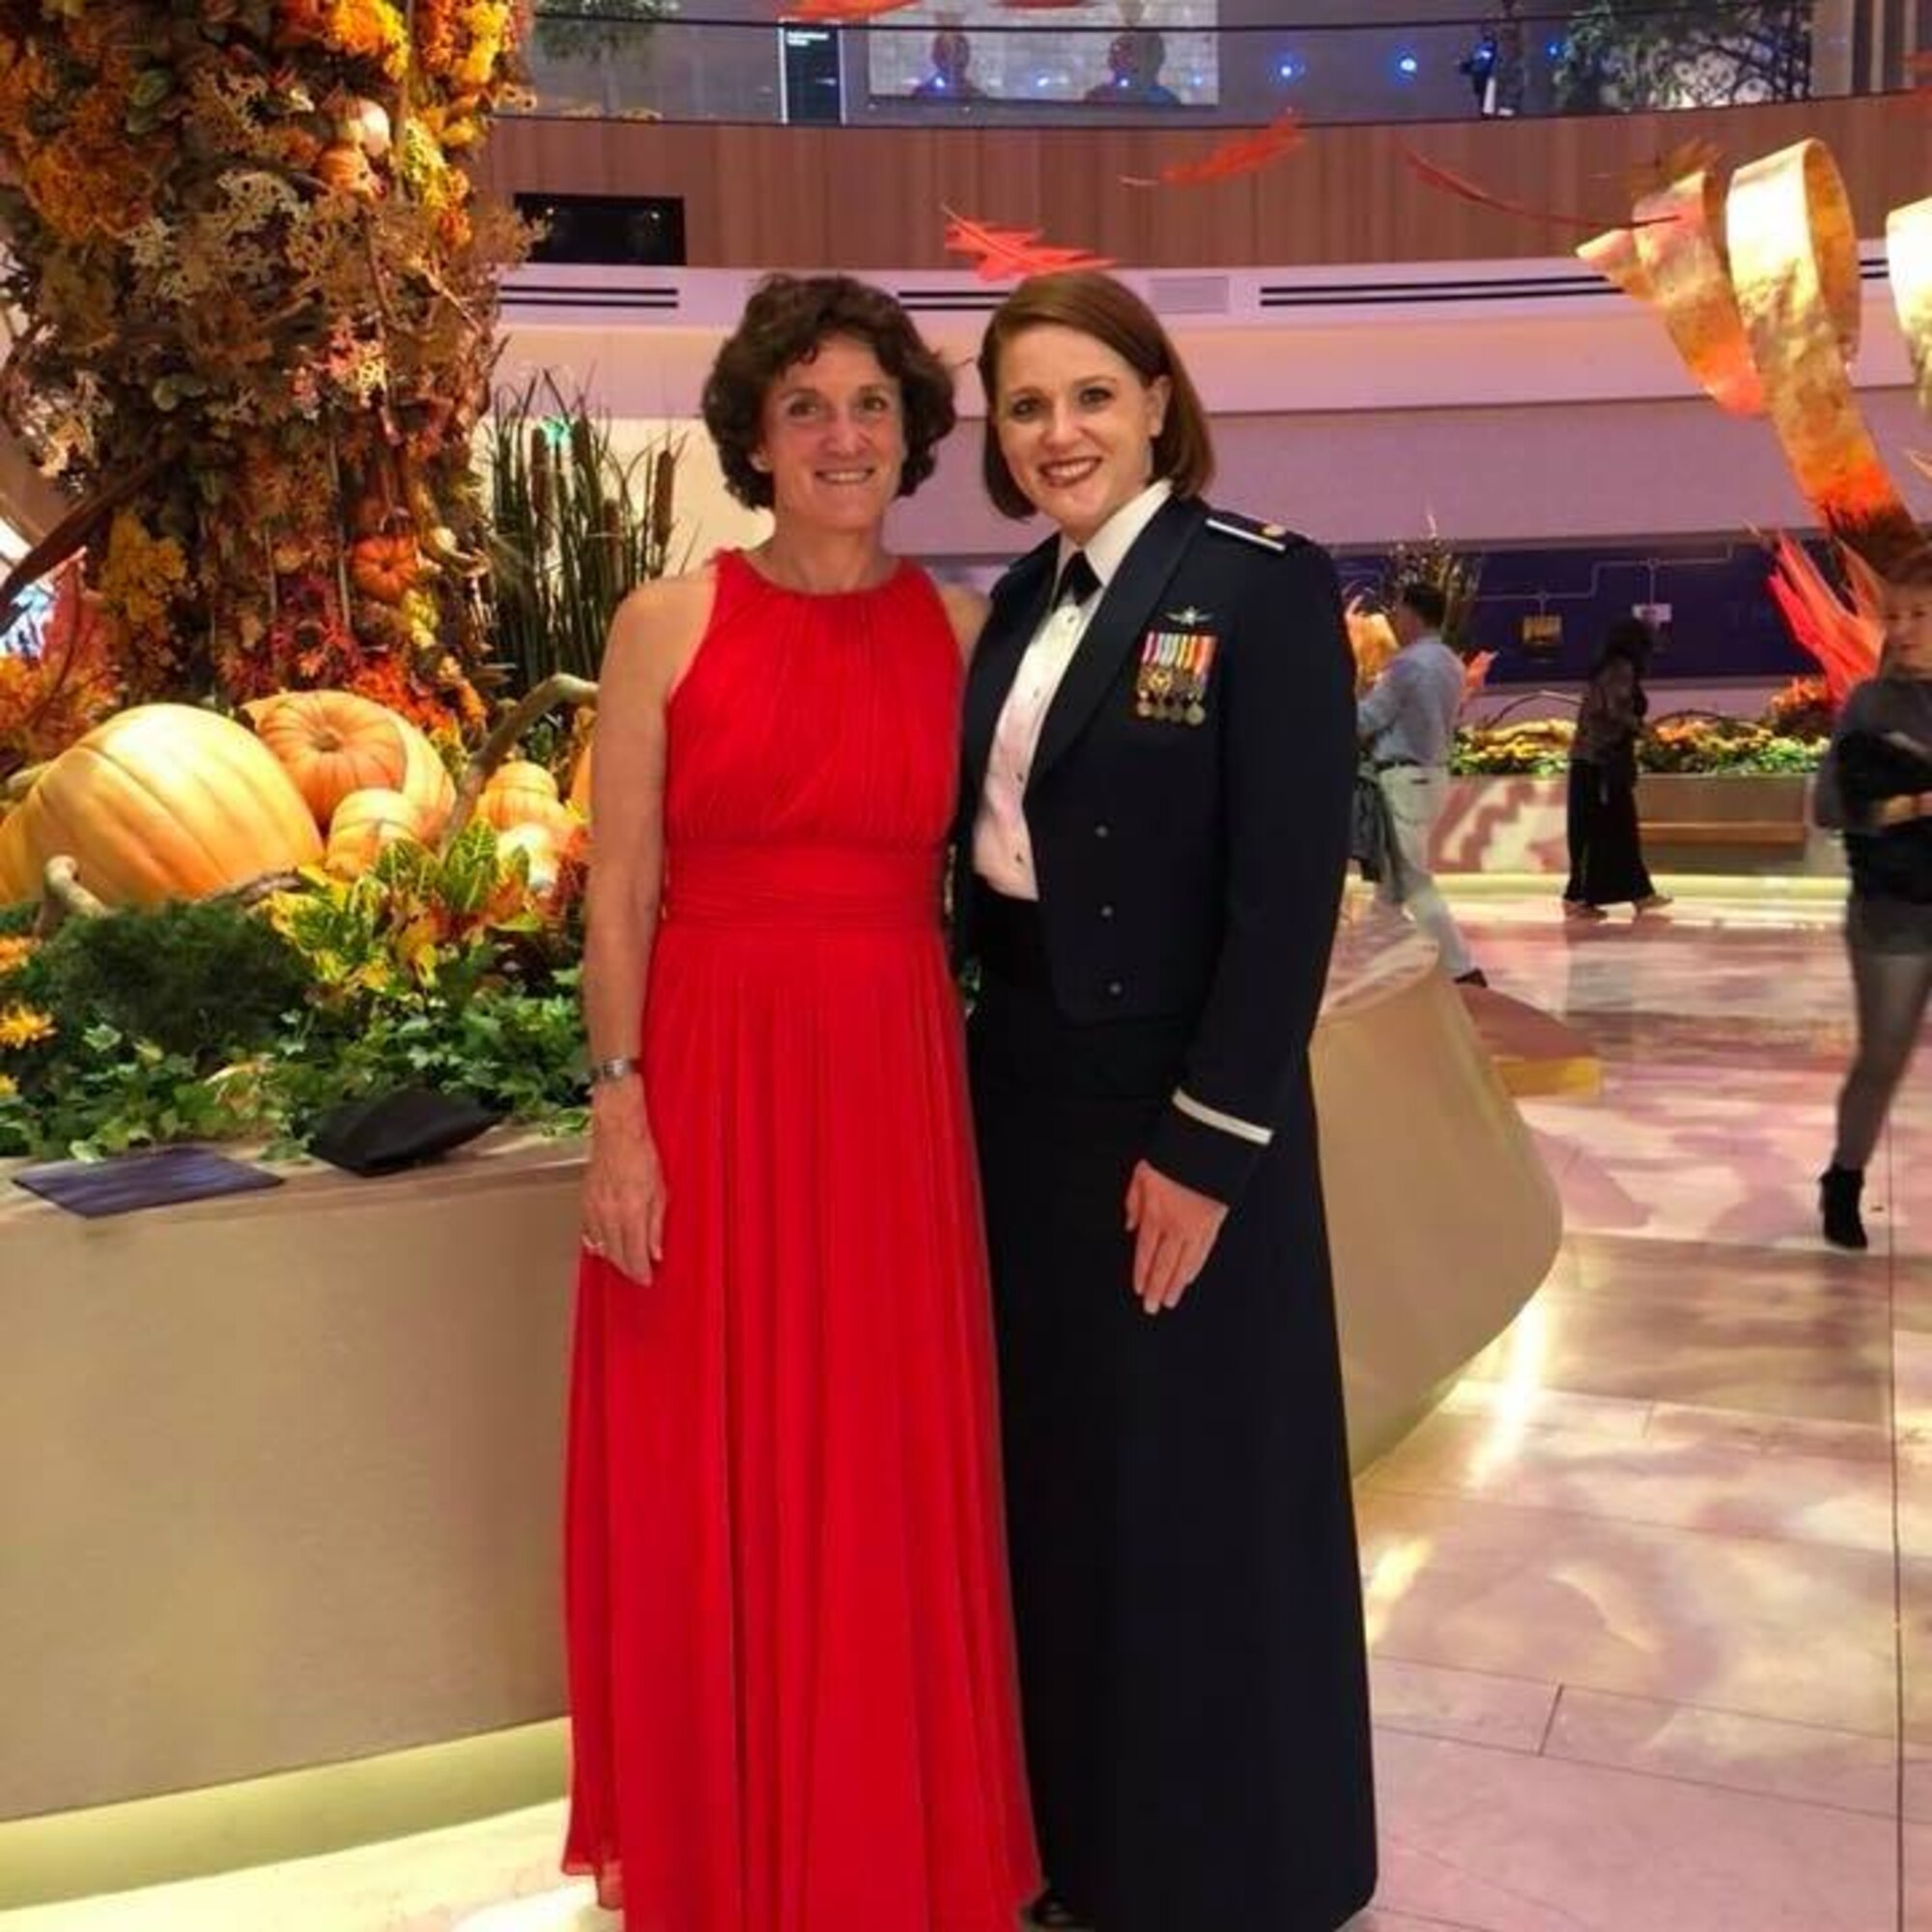 Linda Ambard, a violence prevention integrator at the 509th Bomb Wing at Whiteman Air Force Base, Missouri, left, stands with her daughter, U.S. Air Force Maj. Emily Short, during the Air Force Symposium dinner Sept. 19, 2018 at National Harbor, Maryland. Ambard and her daughter attended the dinner for the official release of the Gold Star Family video that Ambard narrated. (Courtesy photo)